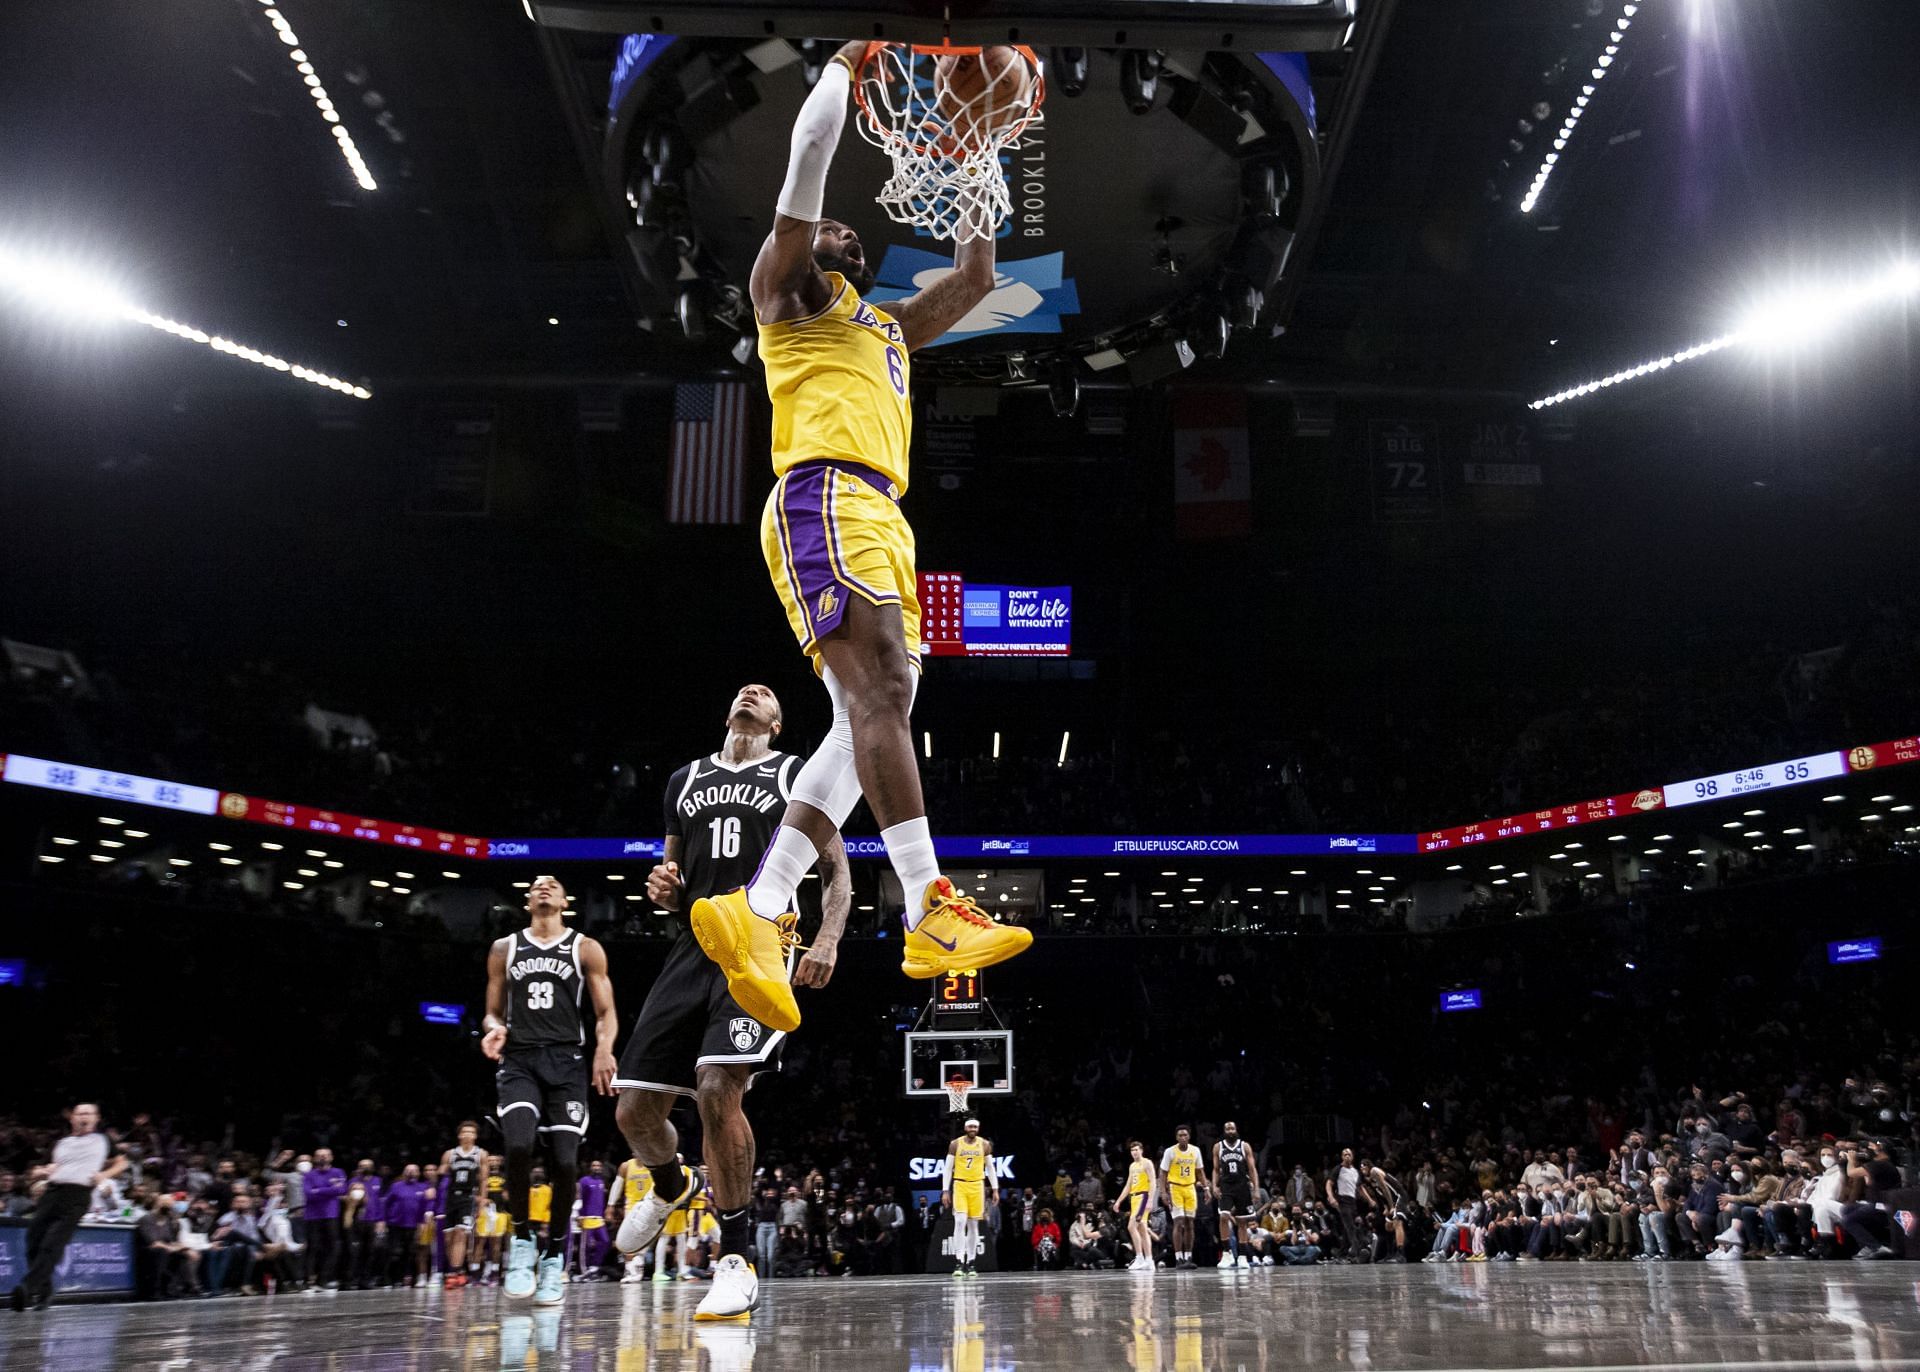 LeBron James #6 of the Los Angeles Lakers dunks against the Brooklyn Nets